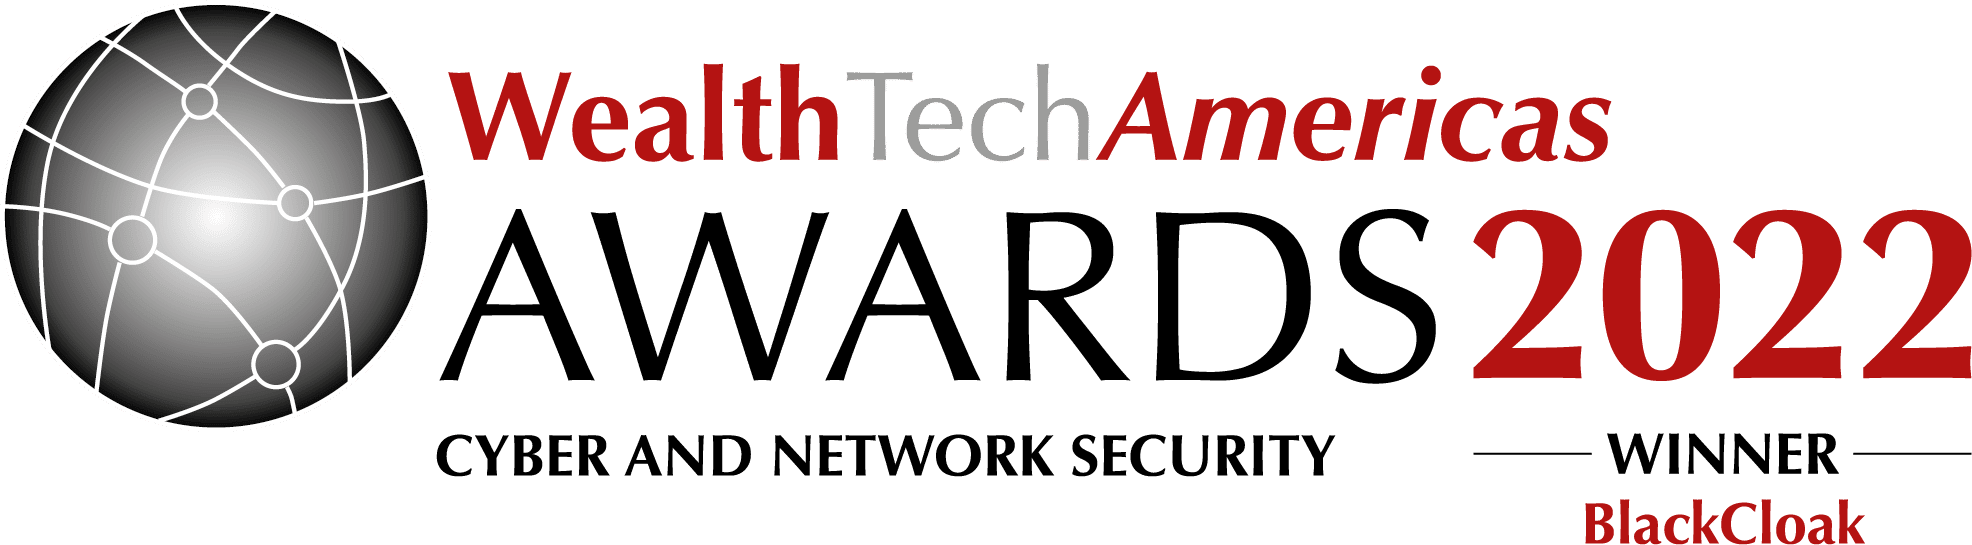 Wealth Tech Americans Awards 2022